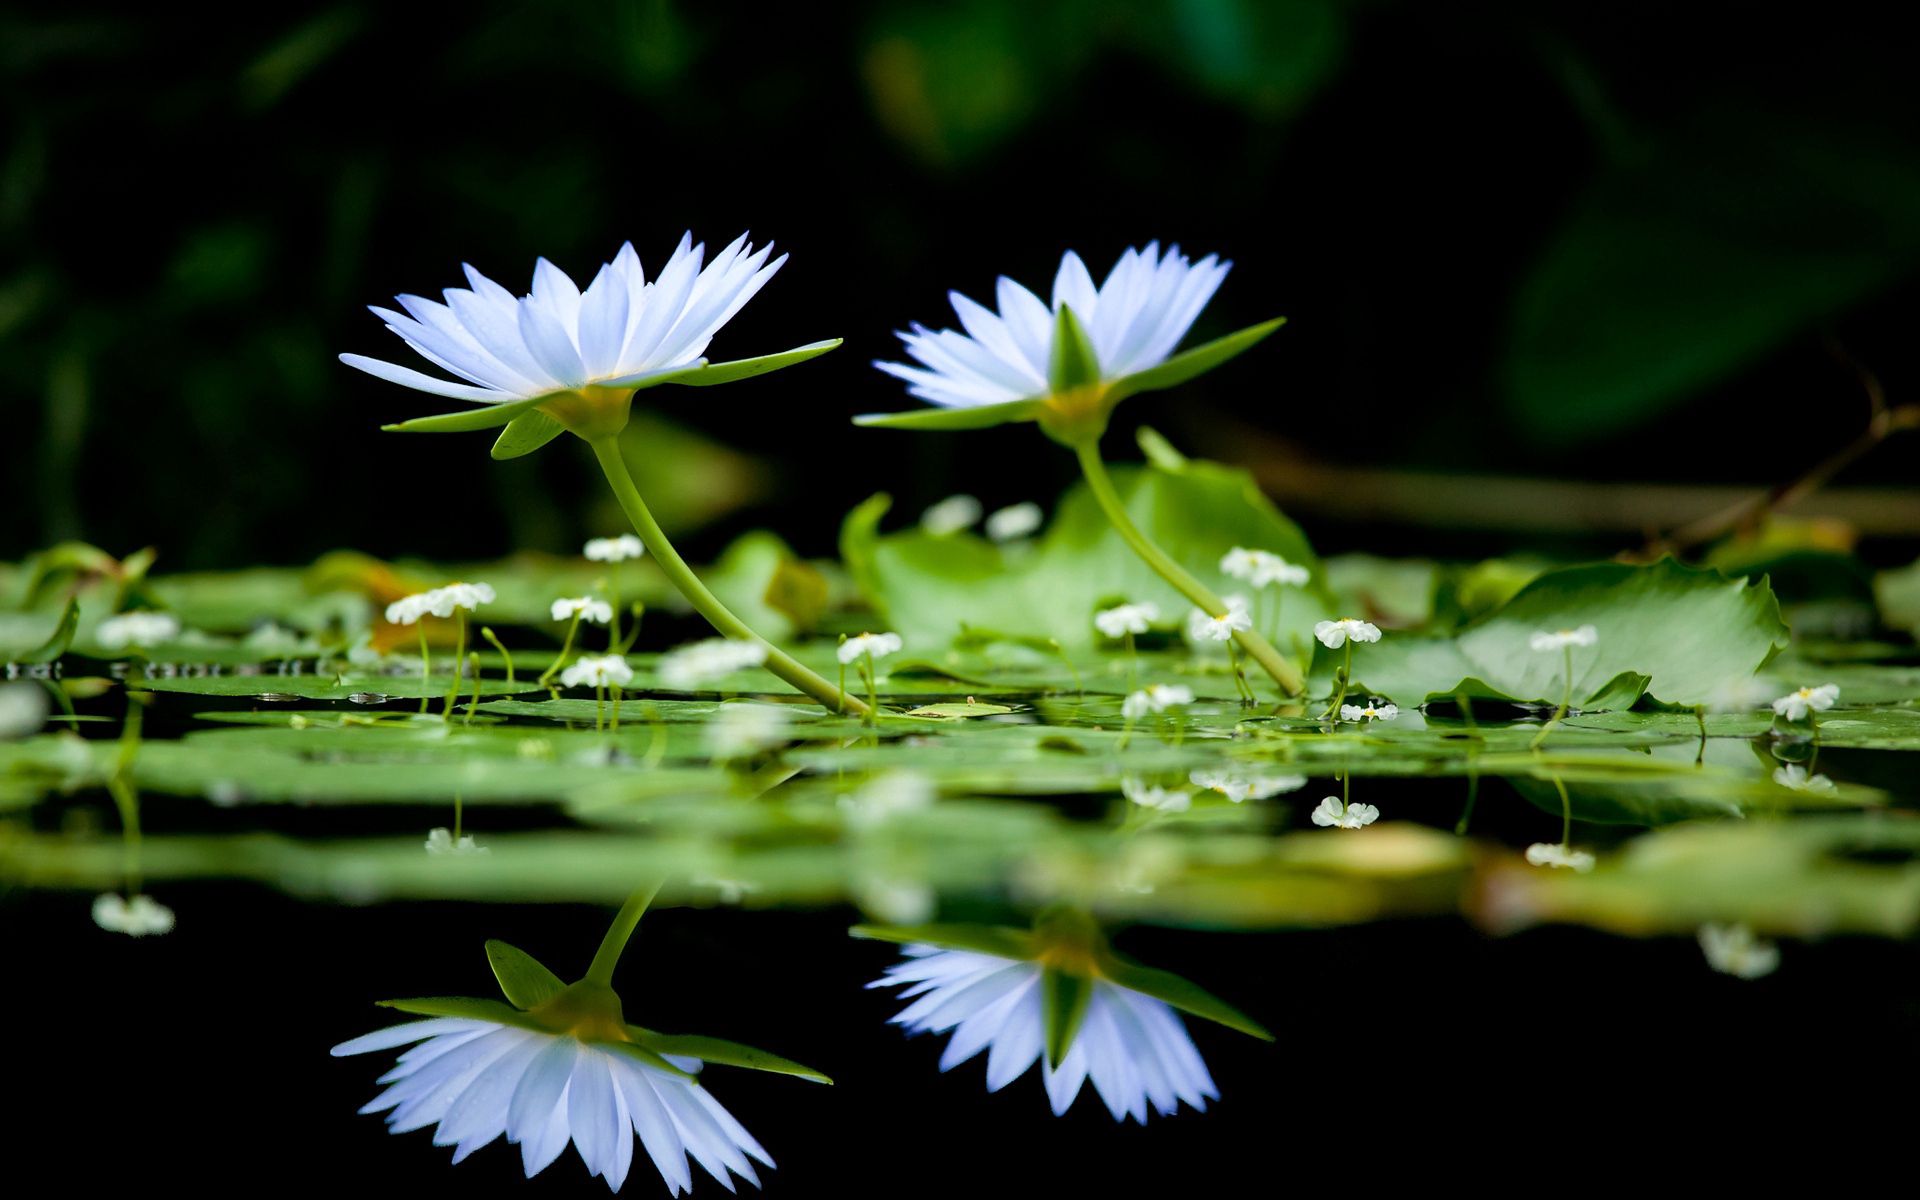 greens, flowers, water, reflection, smooth, surface